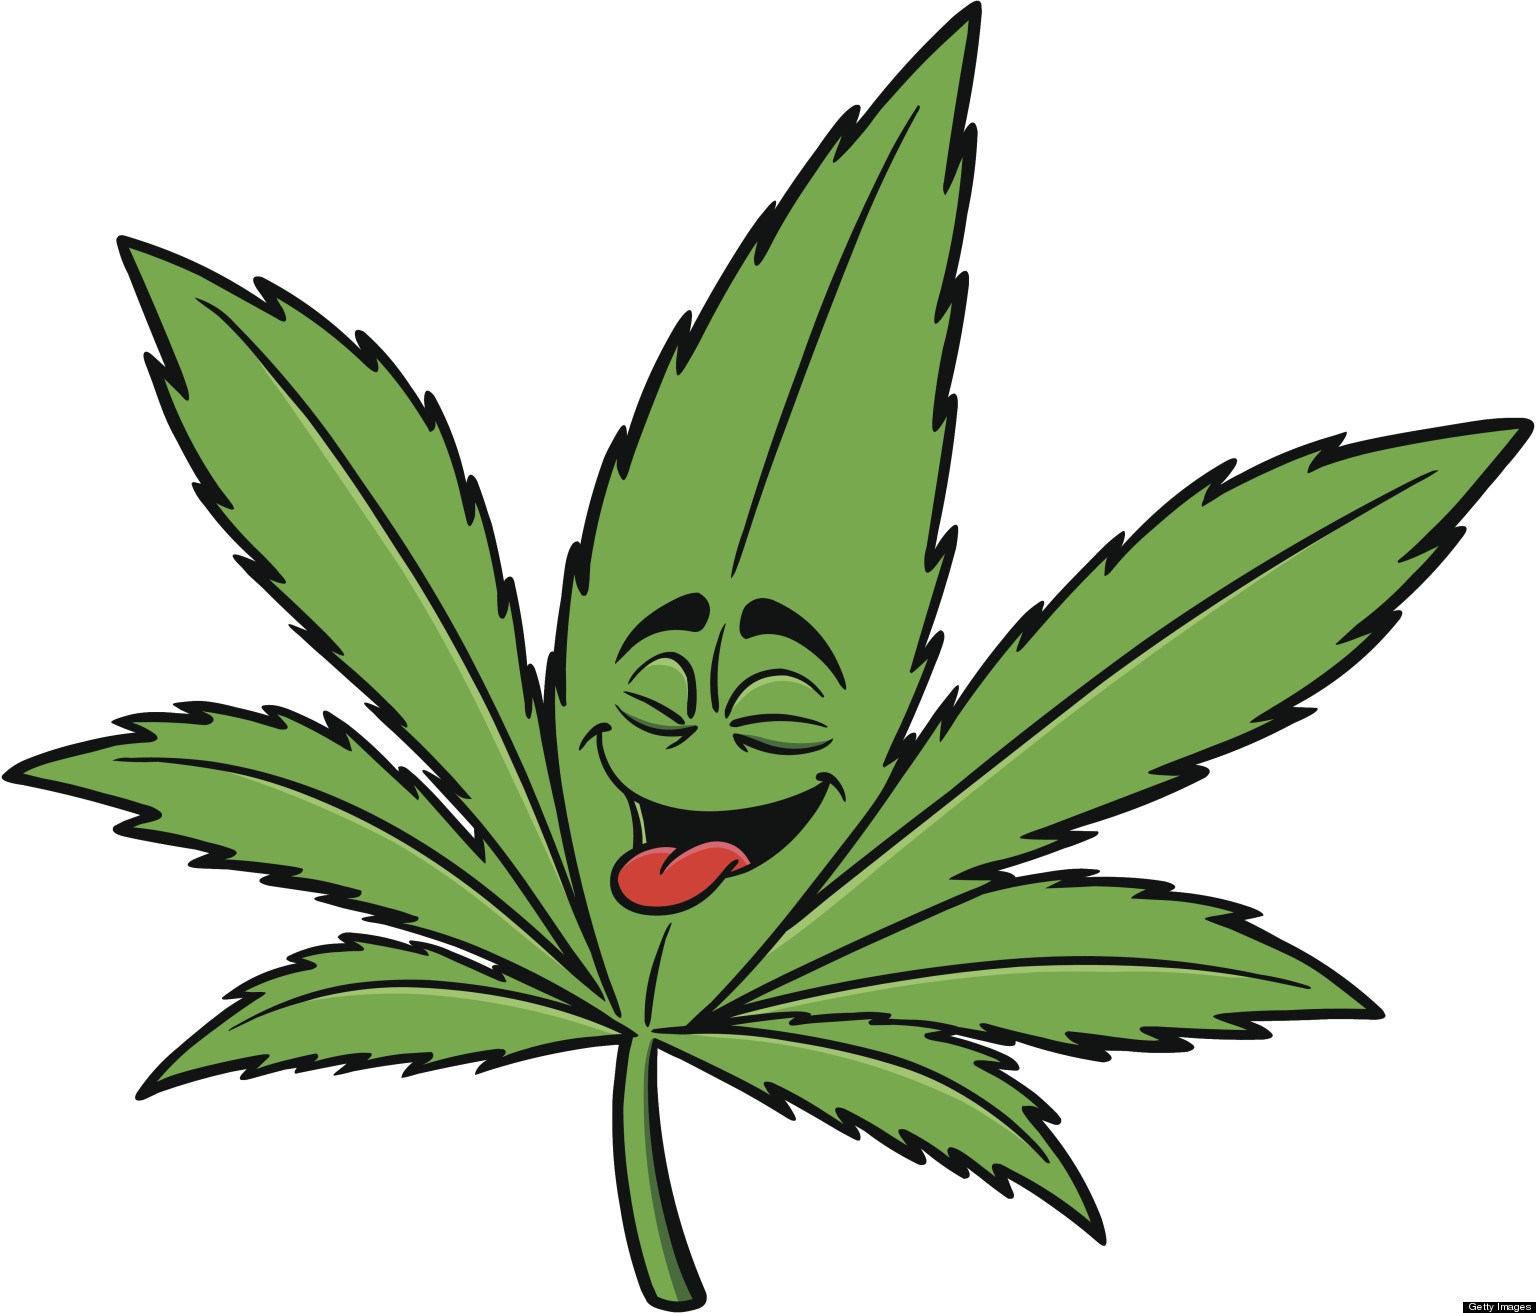 Free clipart weed - ClipartFox